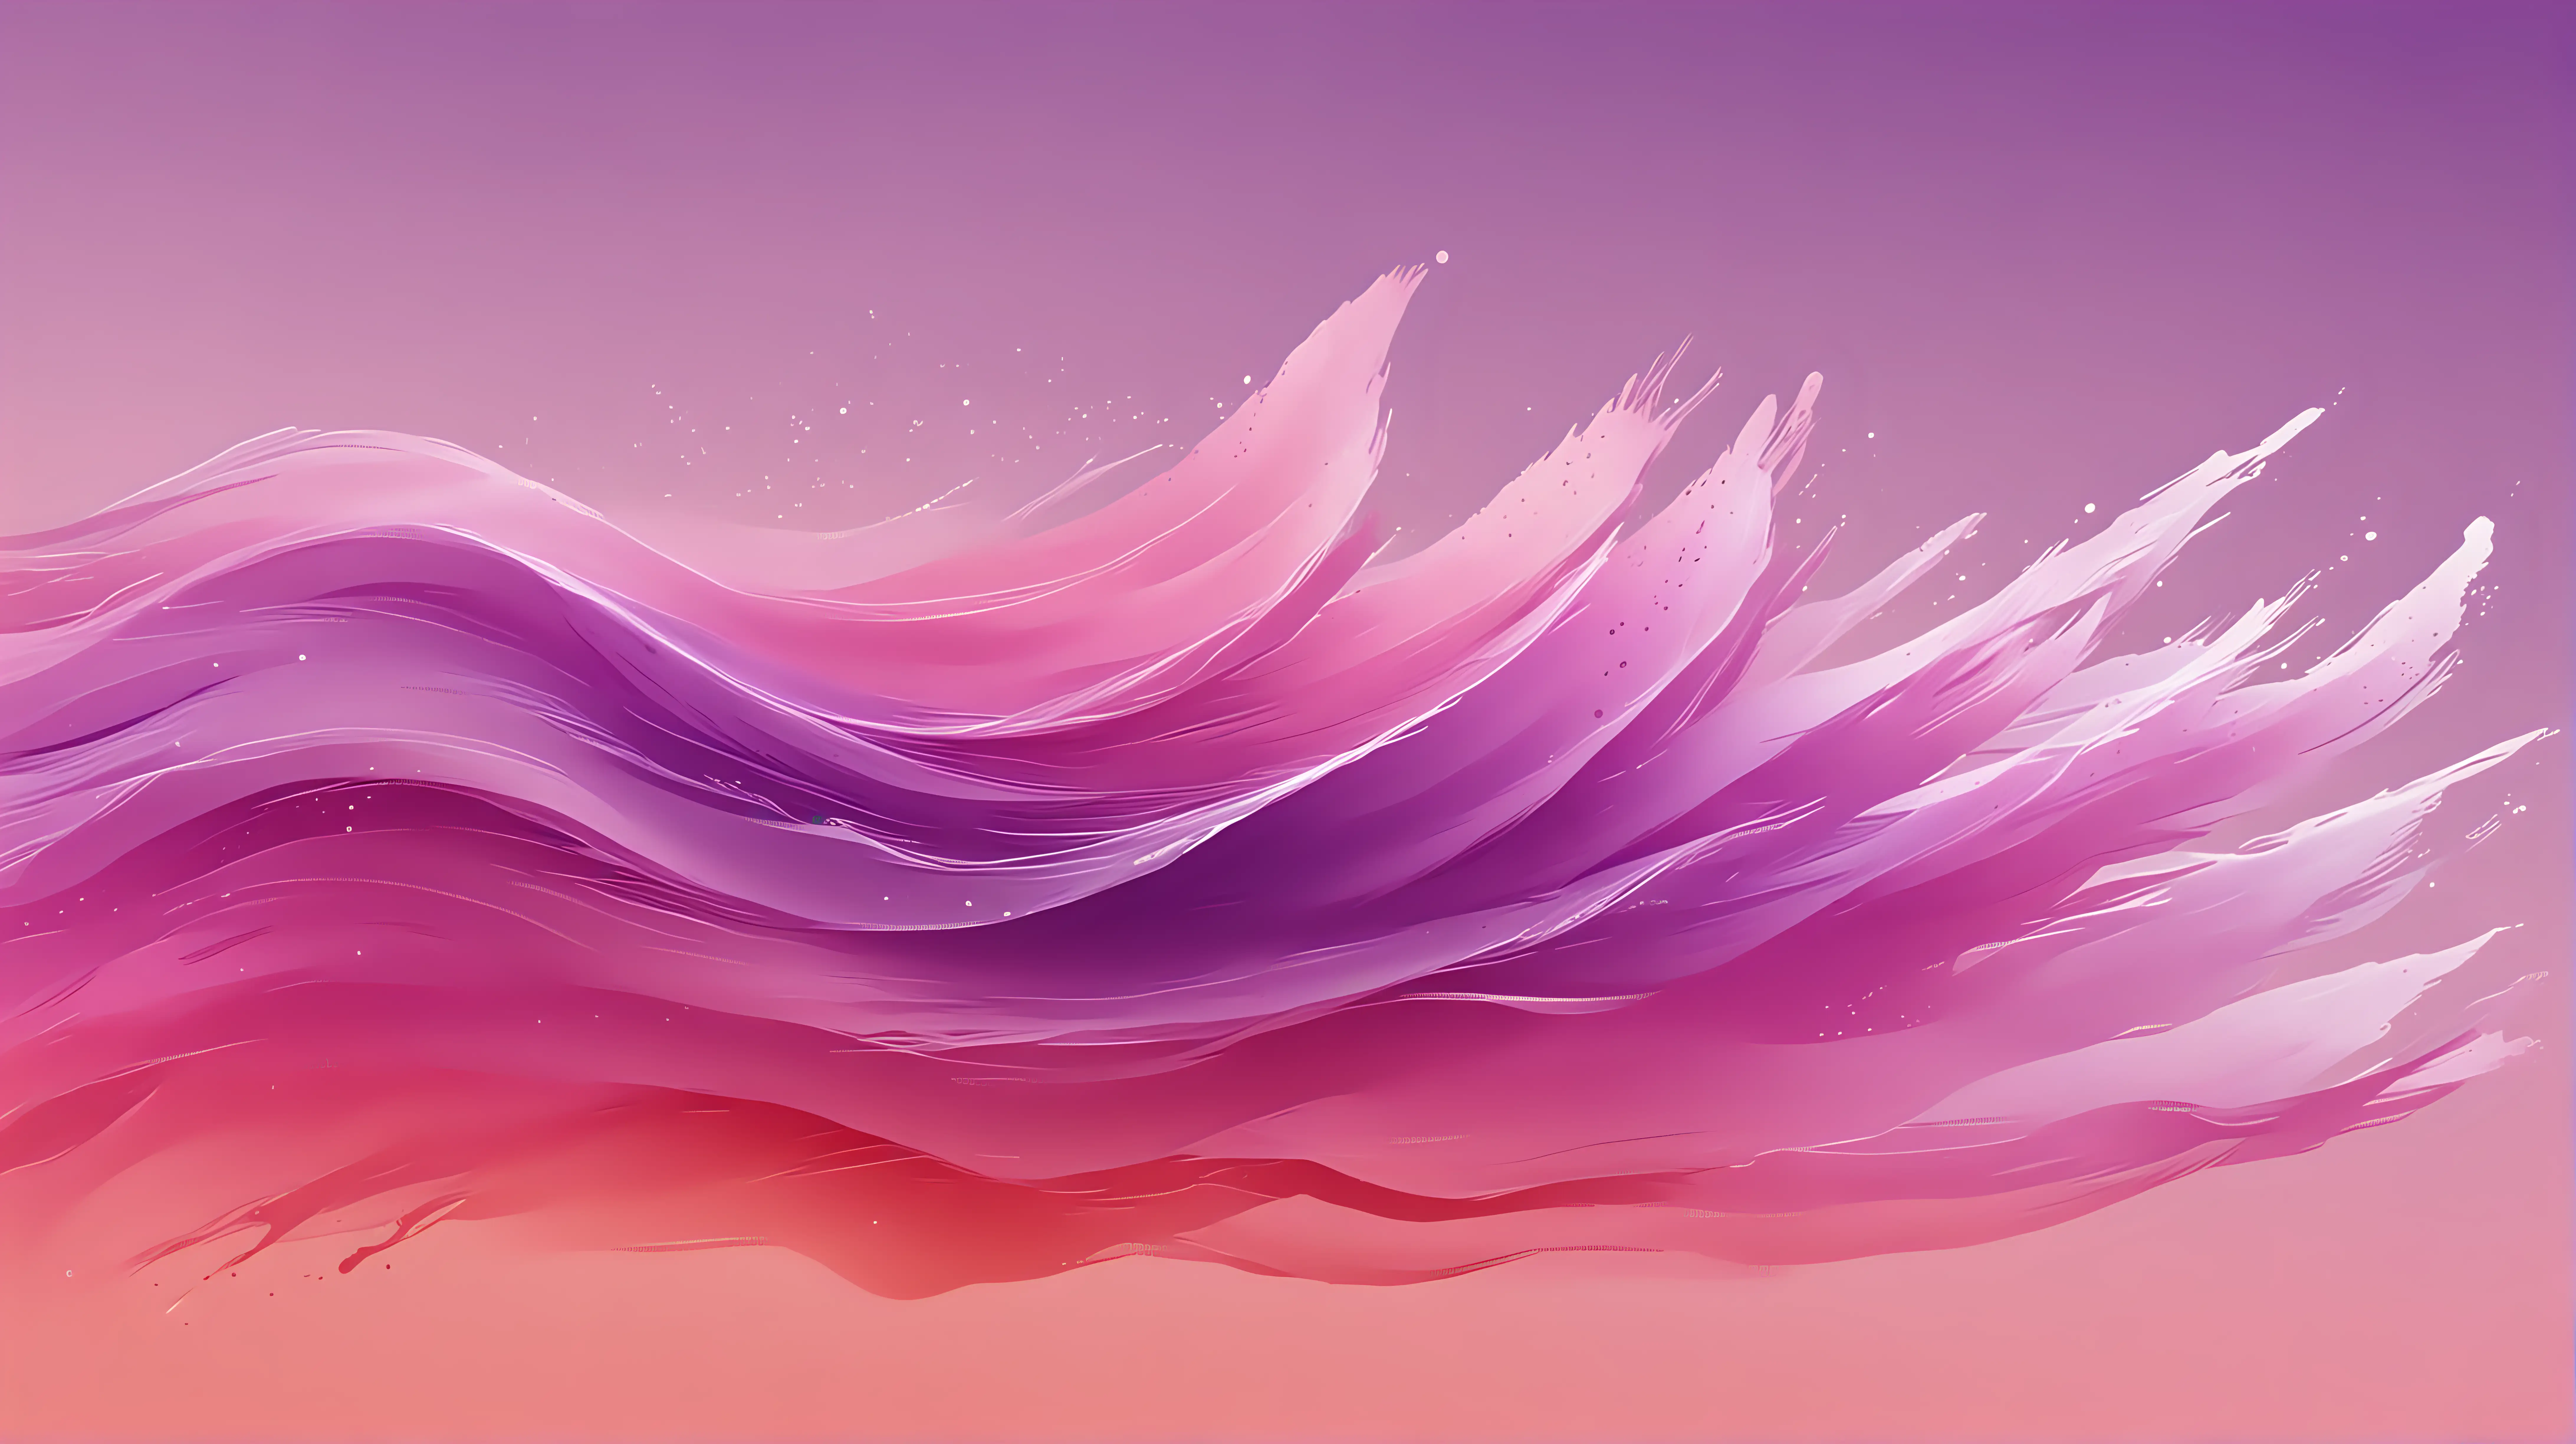 Vibrant Purple and Red Wind Movement in Gouache Style